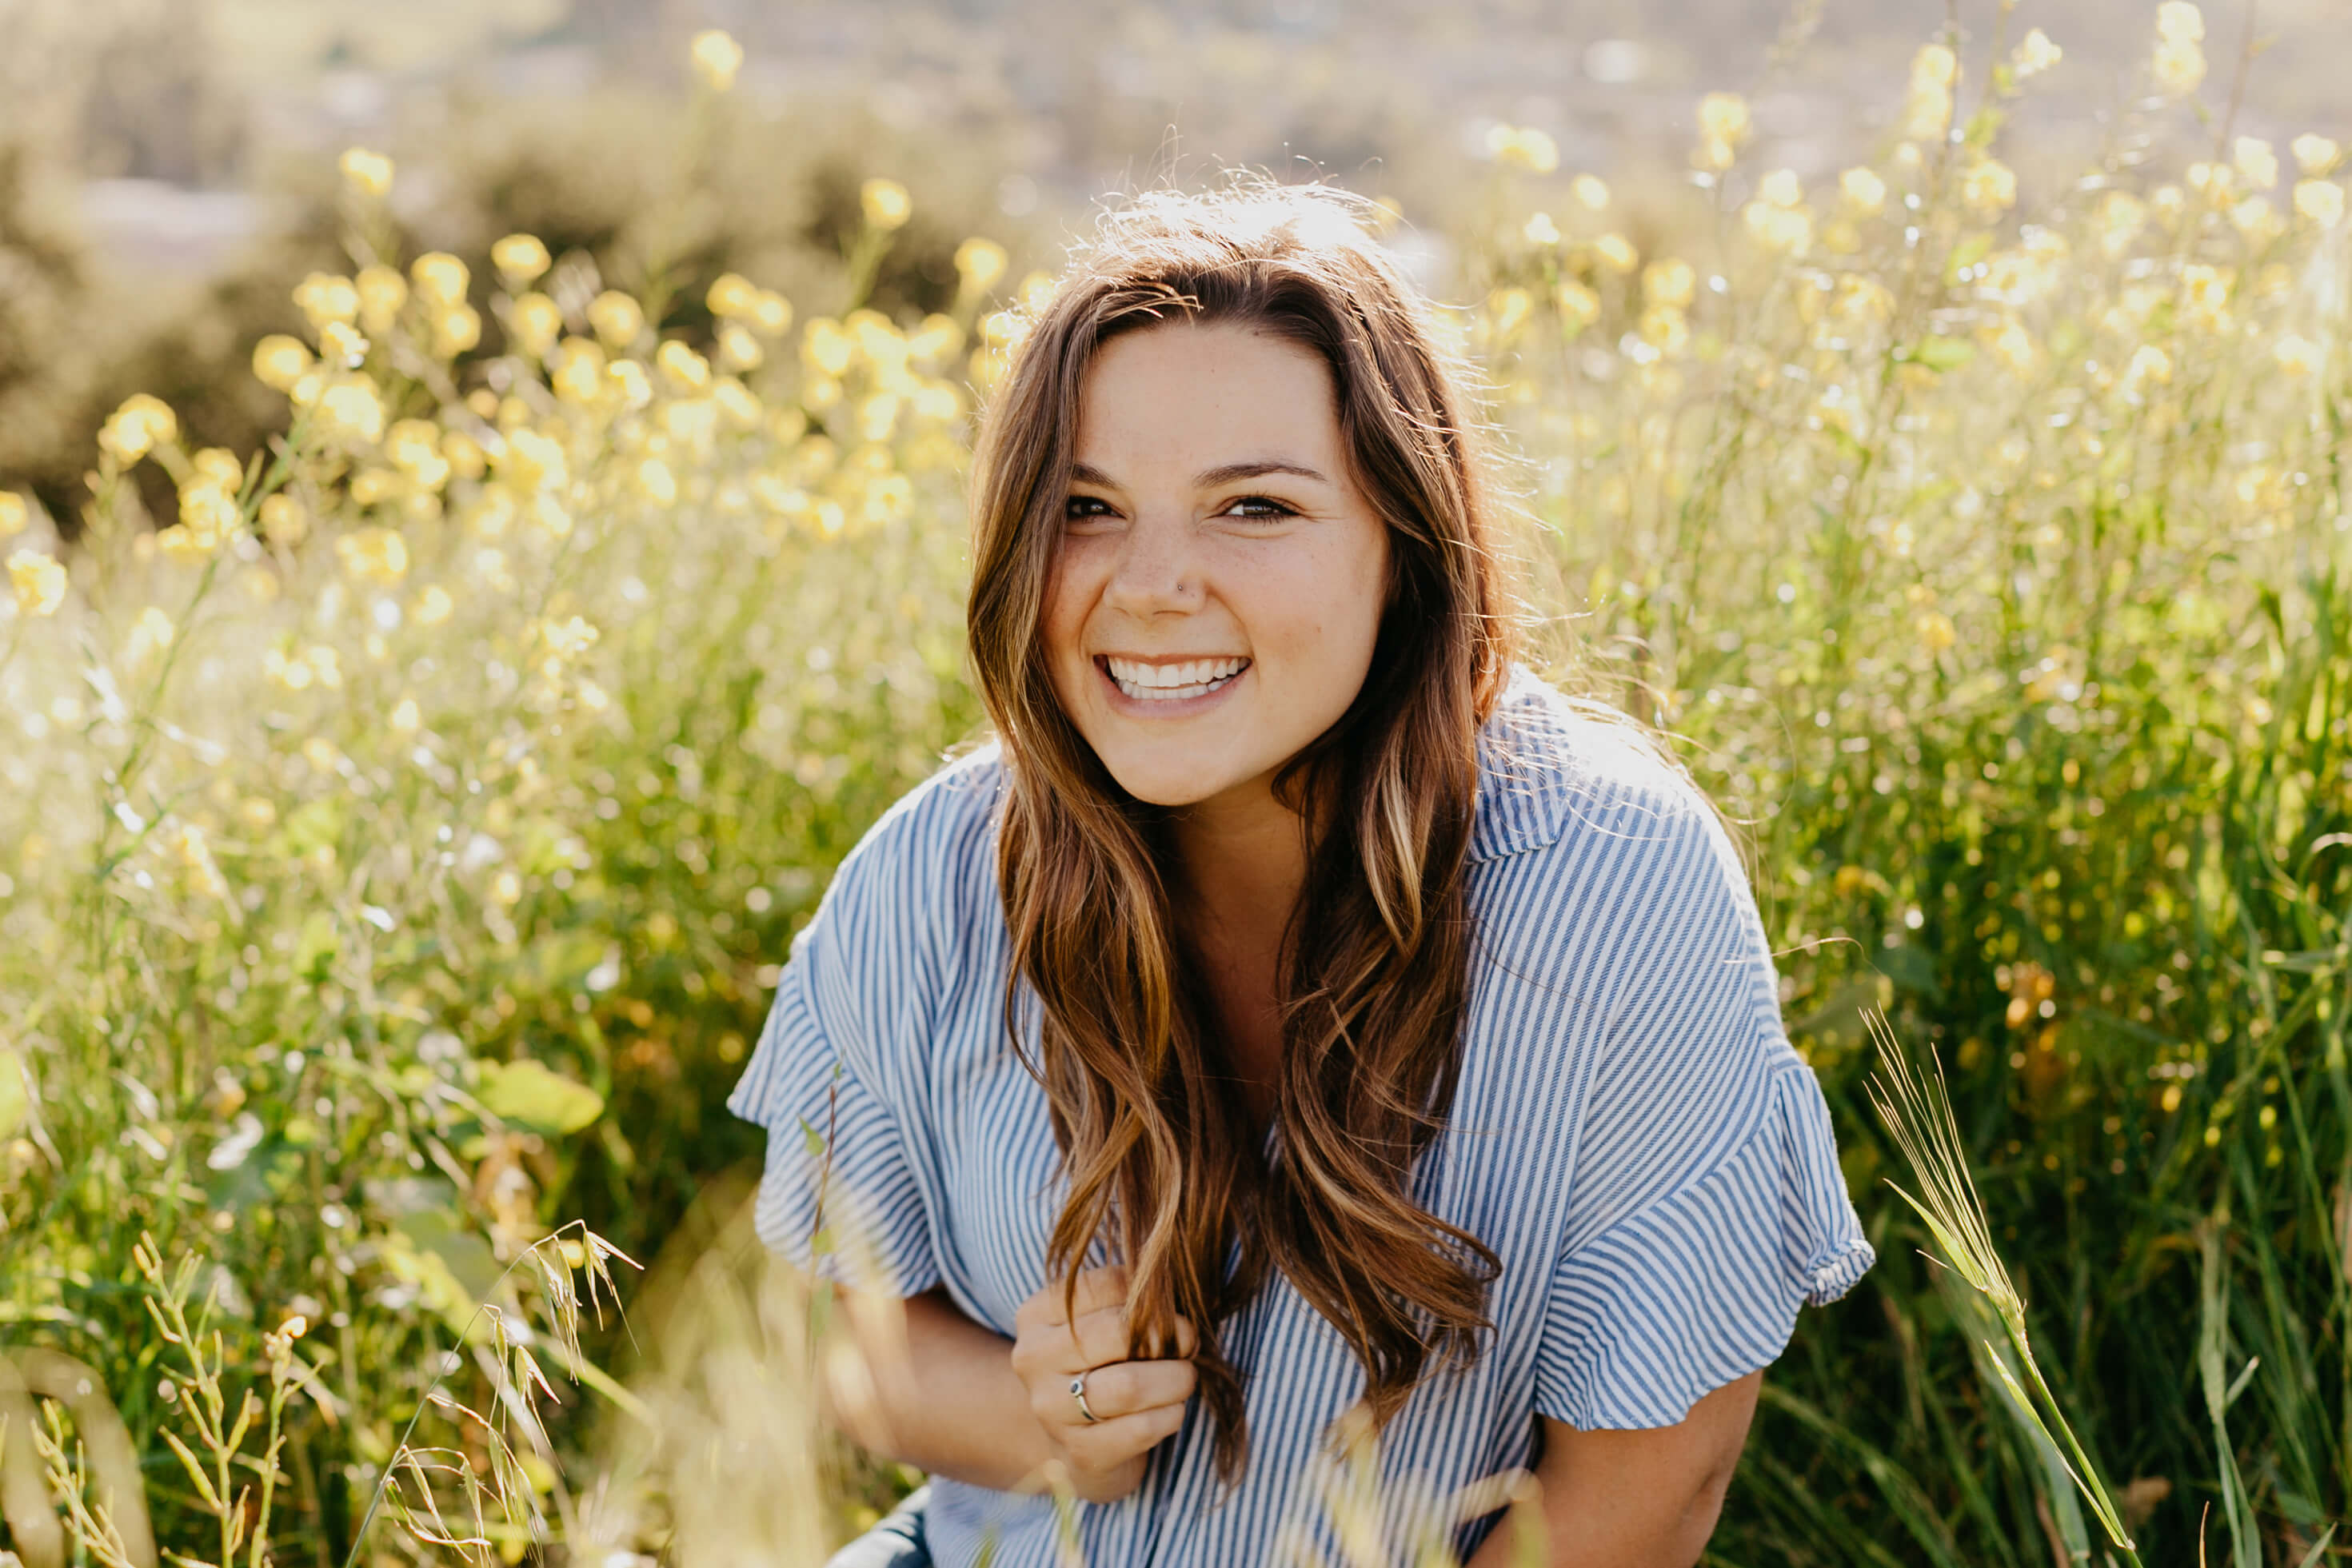 Student Grace Roman smiling while sitting in a grass field